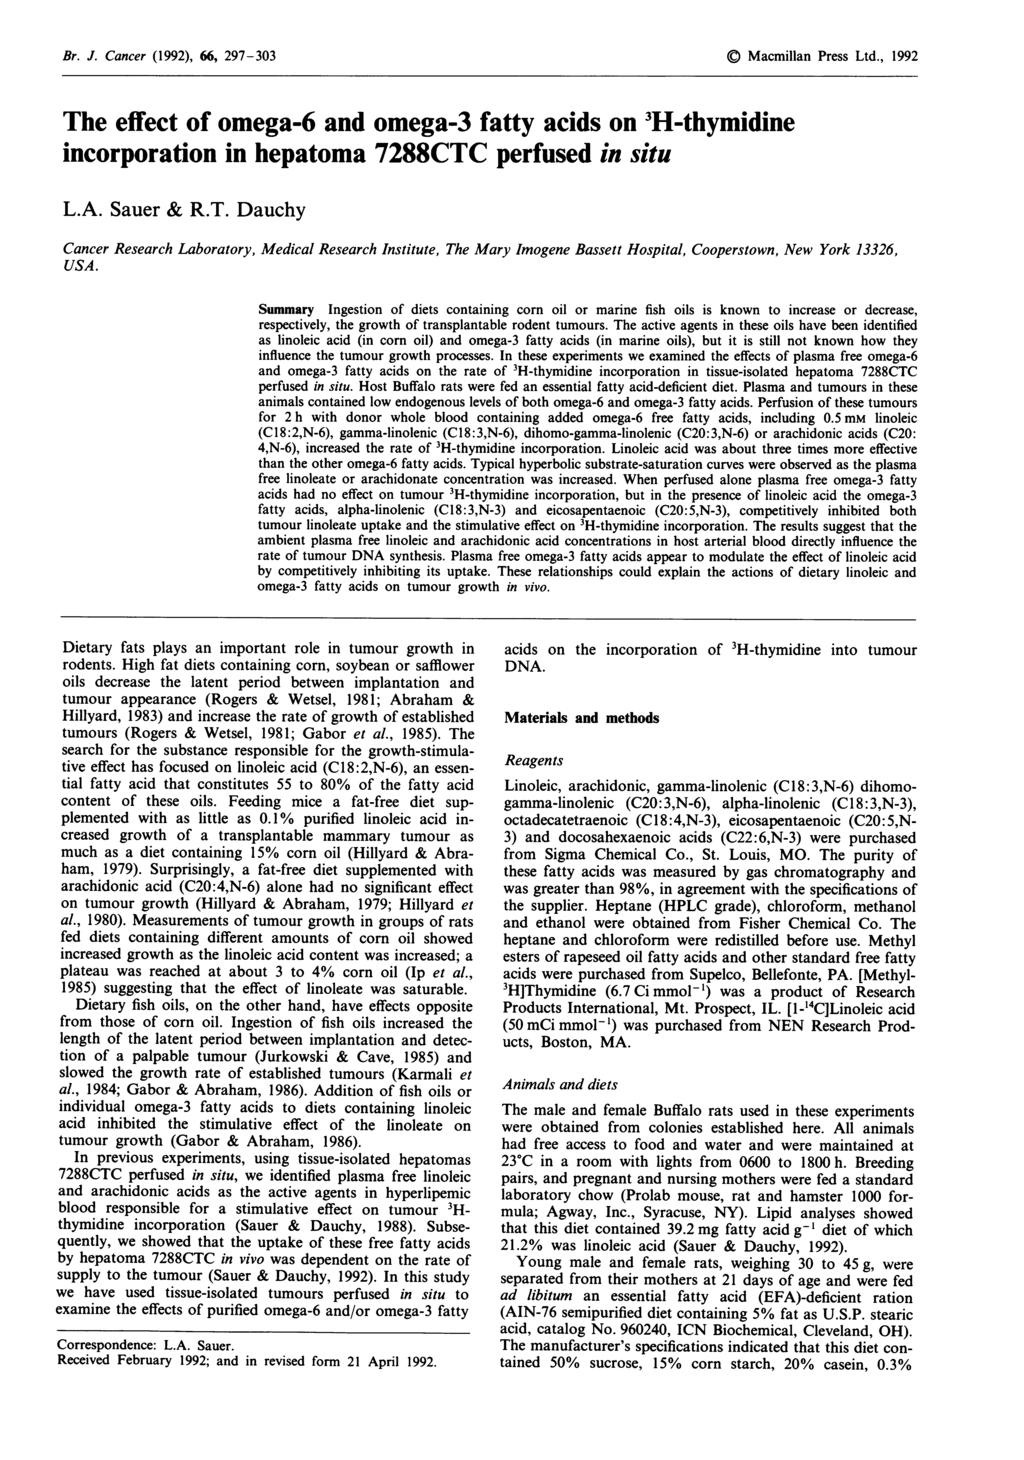 Br. J. Caner (I 992), 66, 297 33 '." Mamillan Press Ltd., 1992 Br. J. Caner (1992), 66, 297-33 Mamillan Press The effet of omega-6 and omega-3 fatty aids on 3H-thymidine inorporation in hepatoma 7288CTC perfused in situ L.